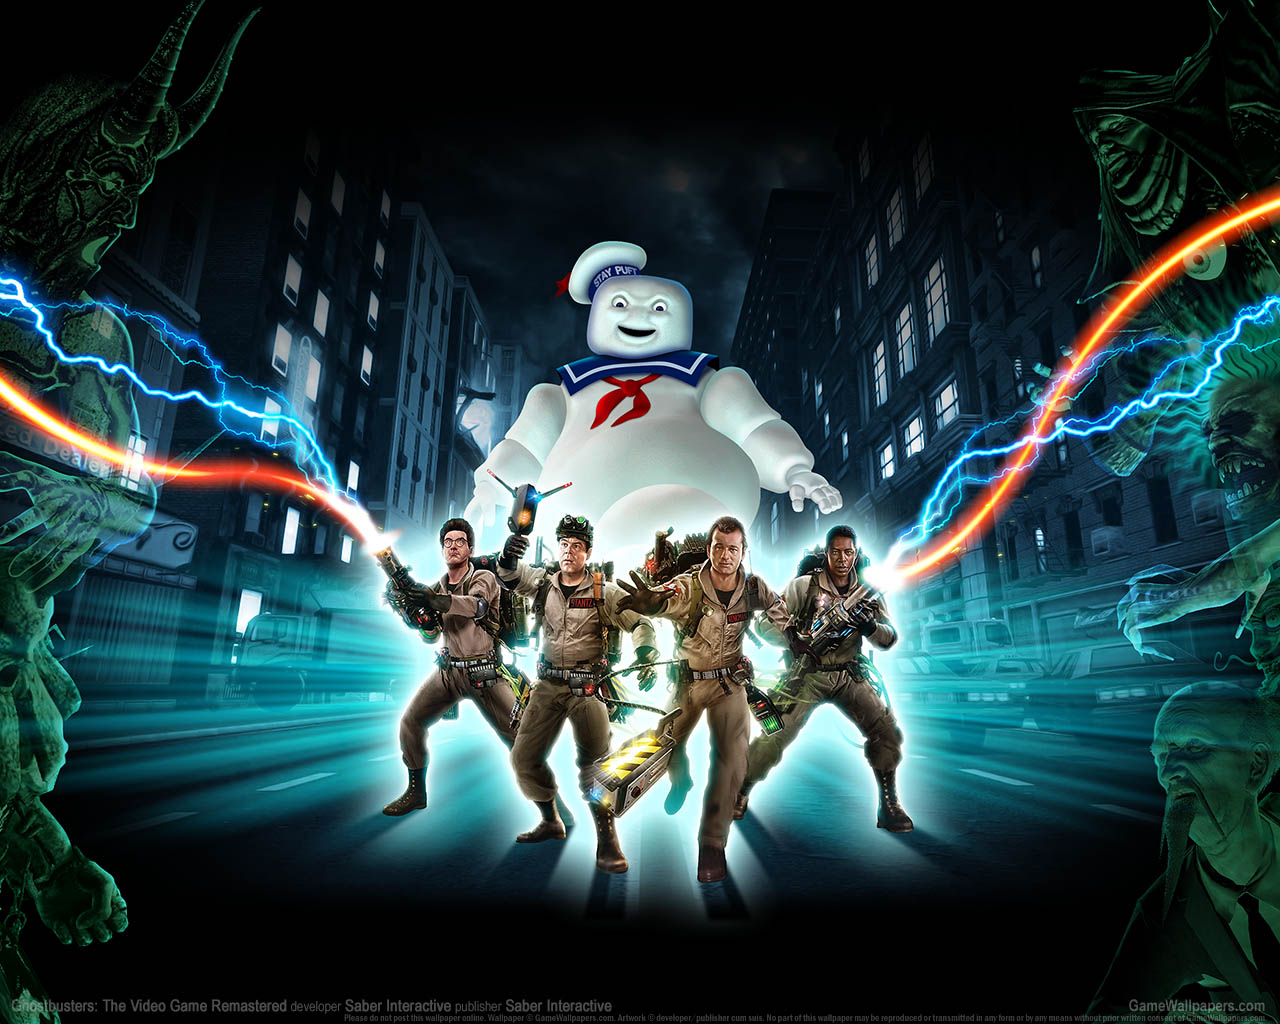 Ghostbusters%253A The Video Game Remastered fond d'cran 01 1280x1024